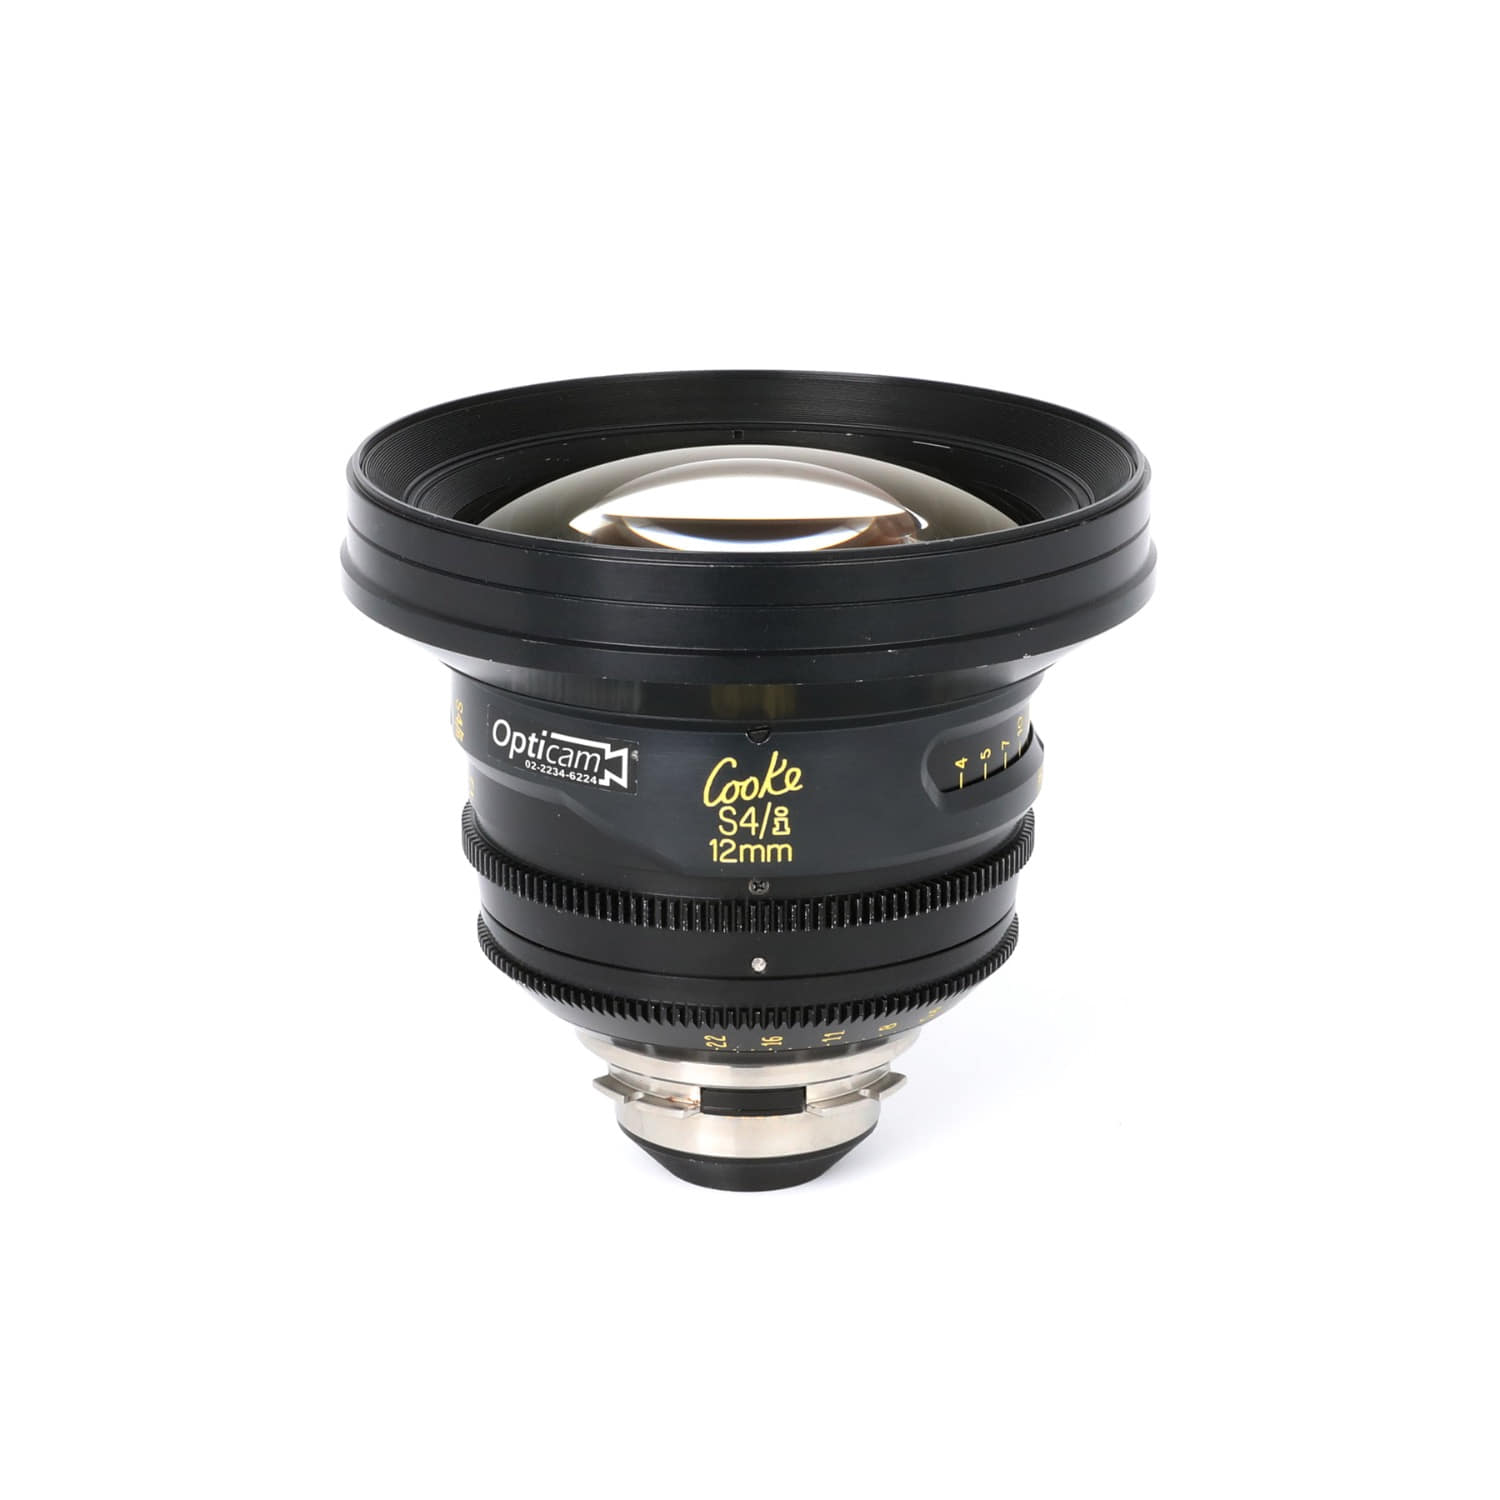 Cooke S4 12mm